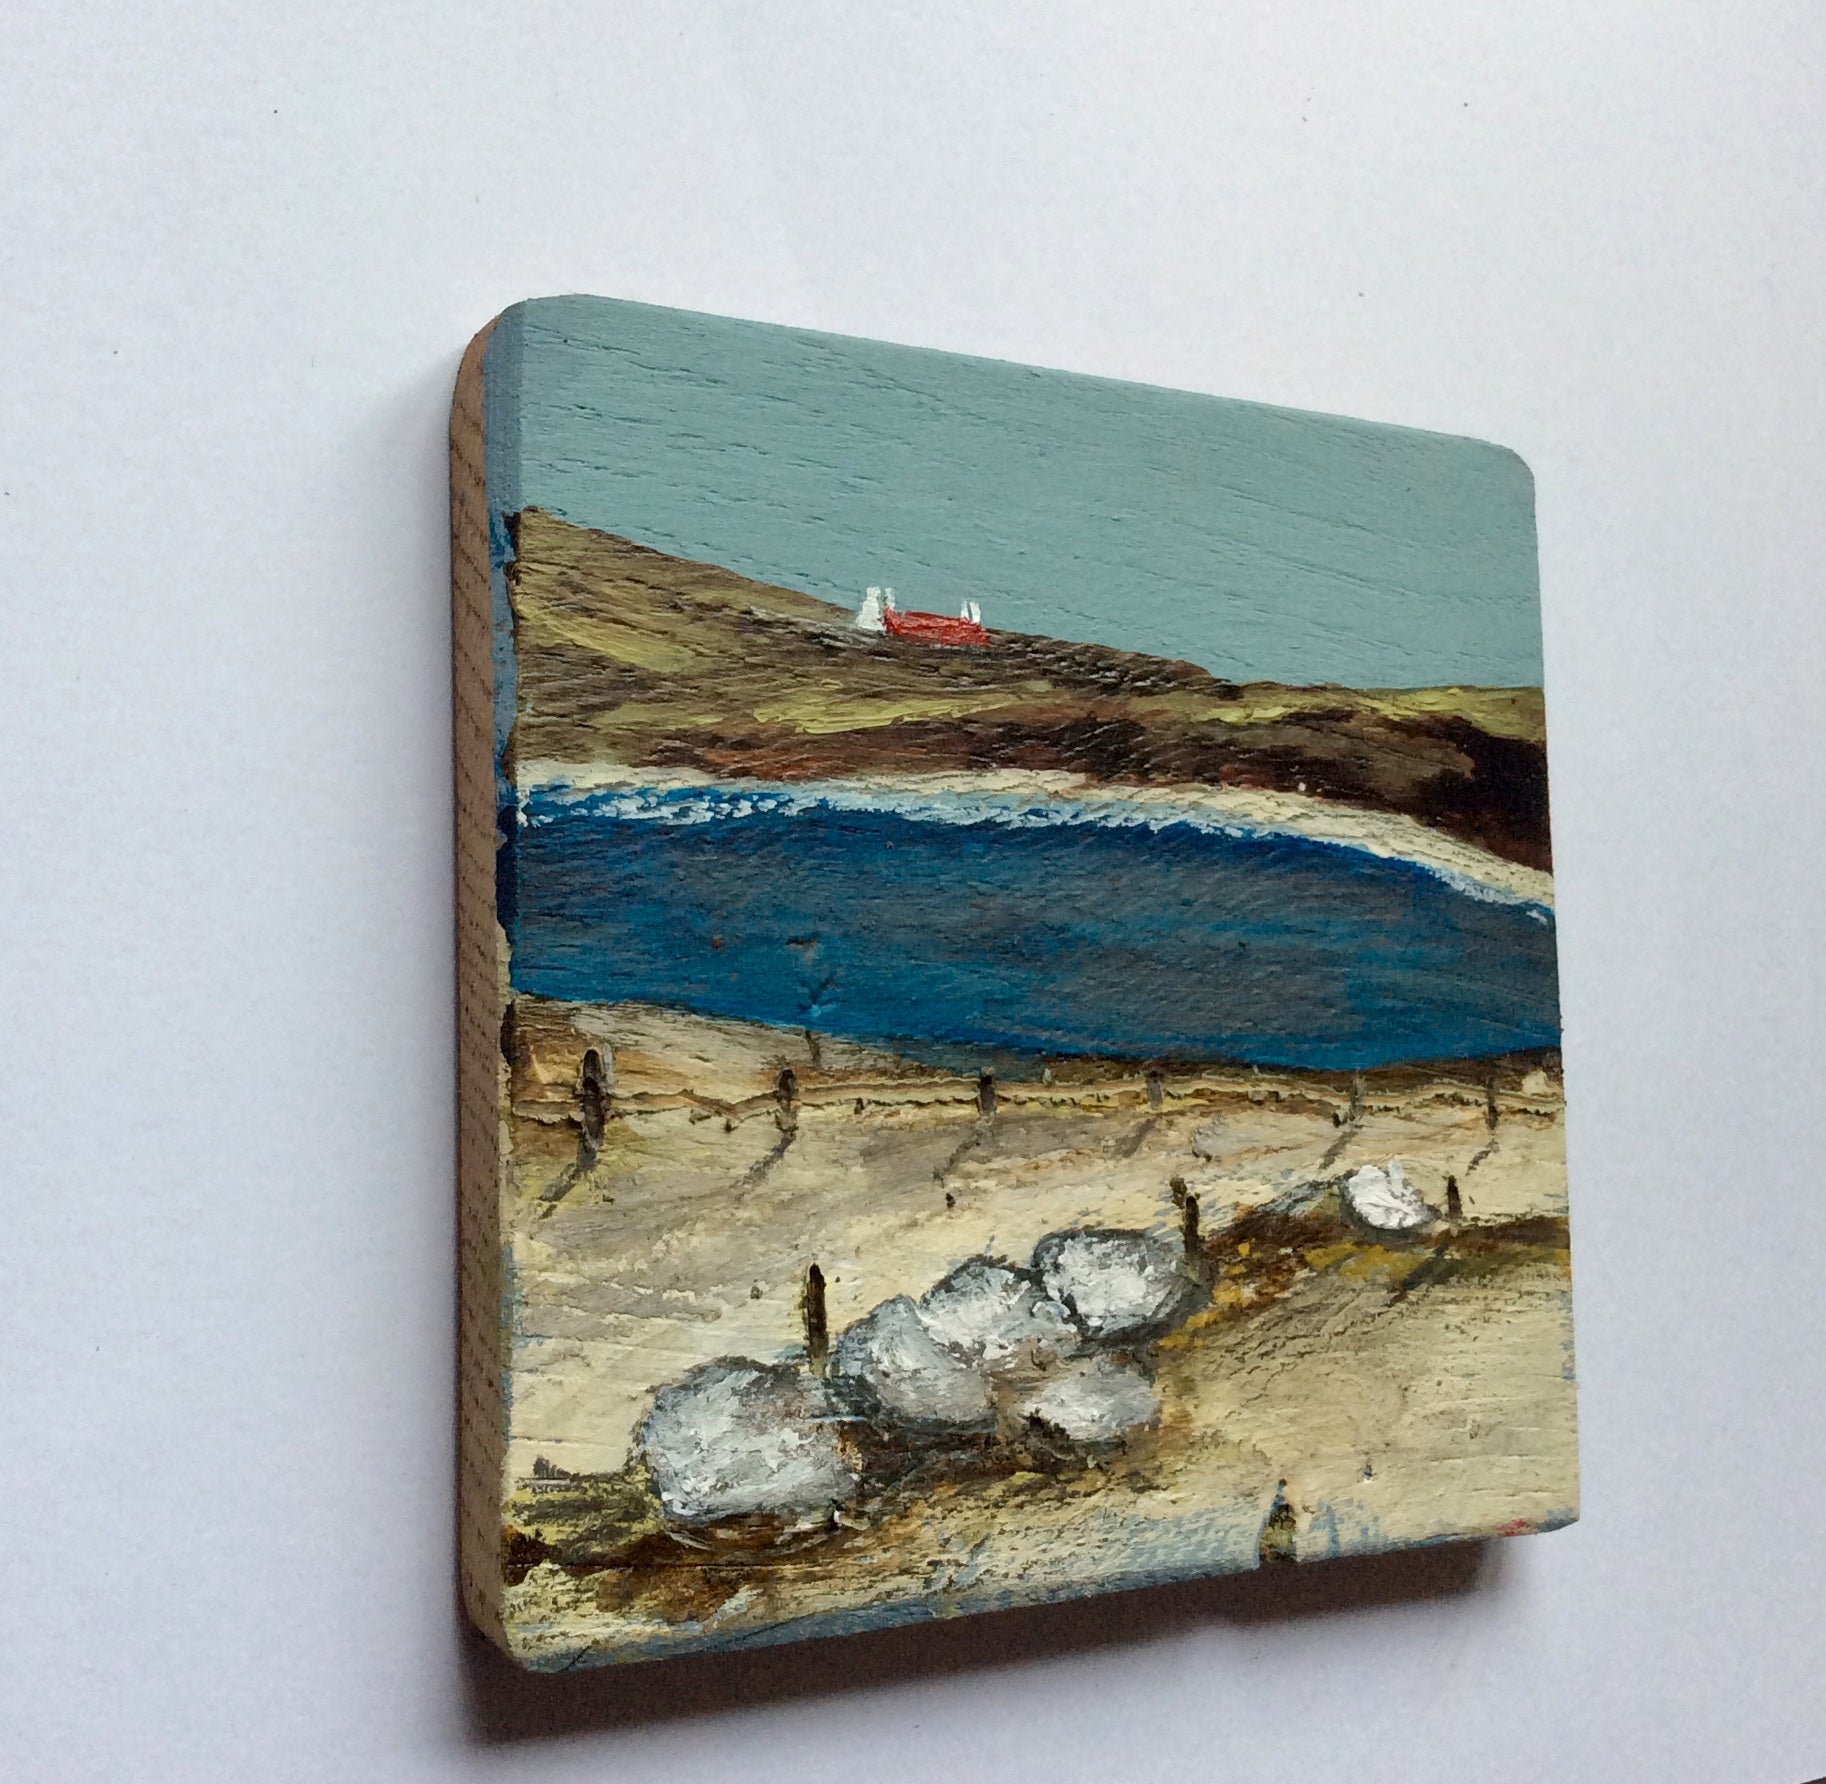 Mixed Media Art on wood By Louise O'Hara - "The rugged shoreline of the West Coast”